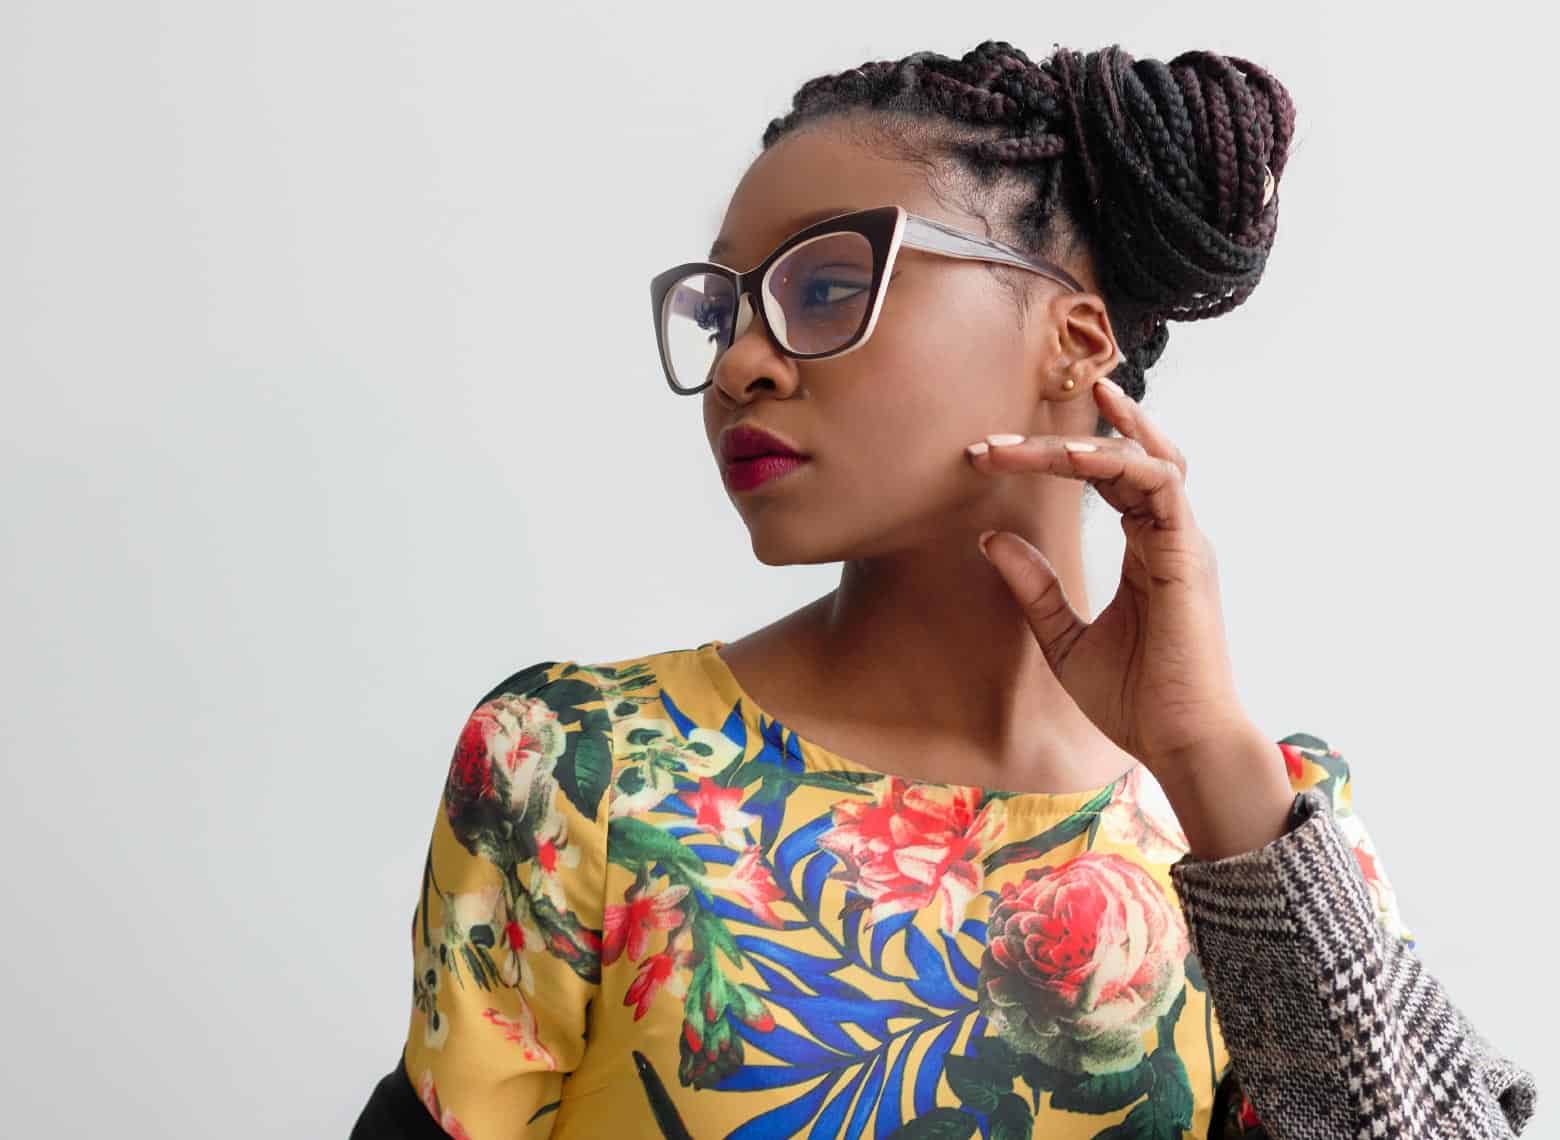 person looking to the side and wearing box braids in a side chignon, also wearing a colorful floral top, glasses, and stud earrings